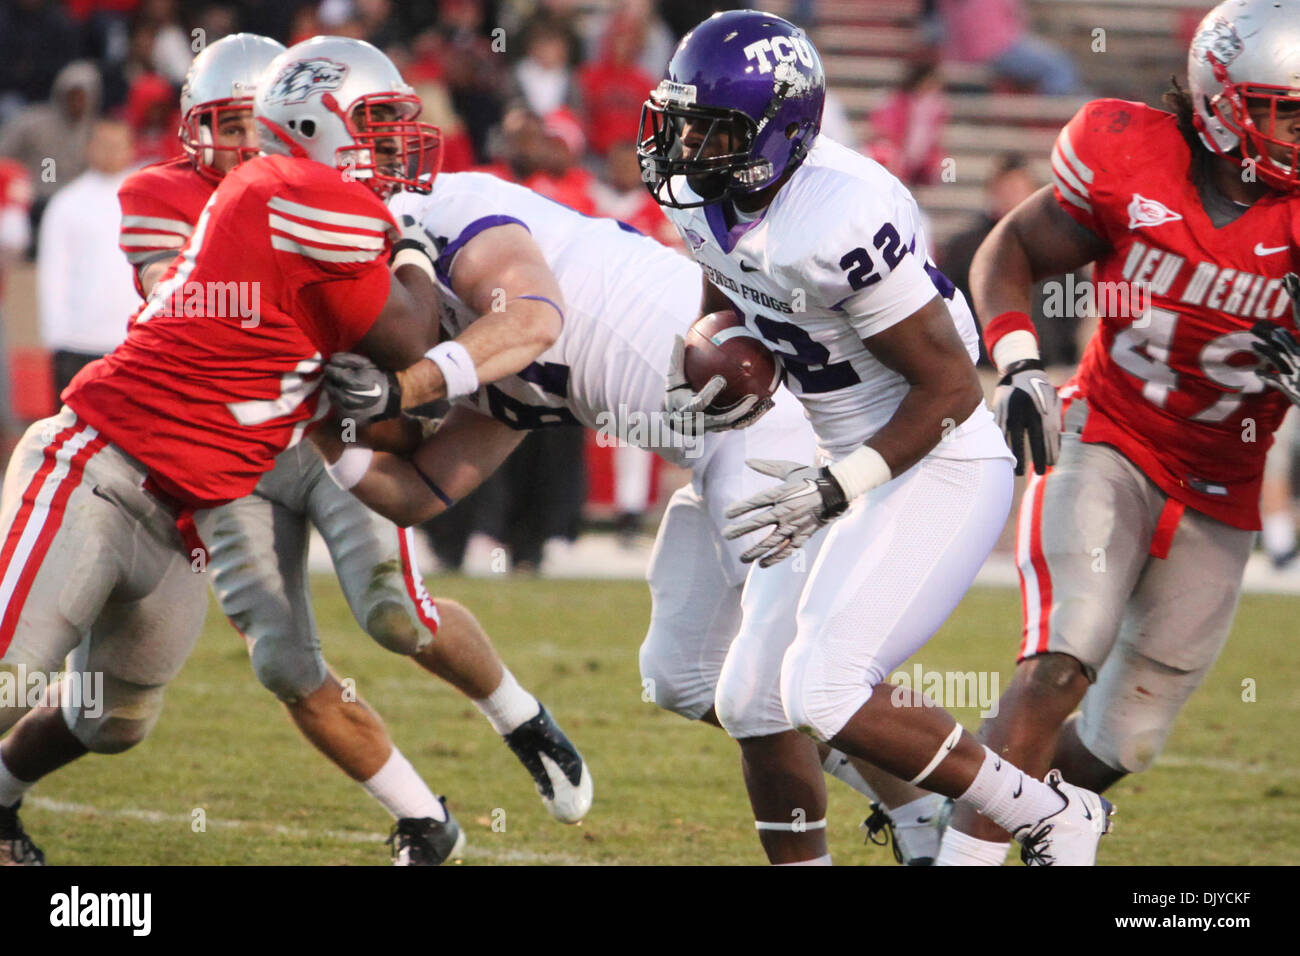 Nov. 27, 2010 - Albuquerque, New Mexico, United States of America - Texas Christian University tail back Jercell Fort (#22) making his way through the Lobo defense. The Mountain West Conference Champions TCU defeated the Lobos 66-17 at University Stadium in Albuquerque, New Mexico. (Credit Image: © Long Nuygen/Southcreek Global/ZUMAPRESS.com) Stock Photo